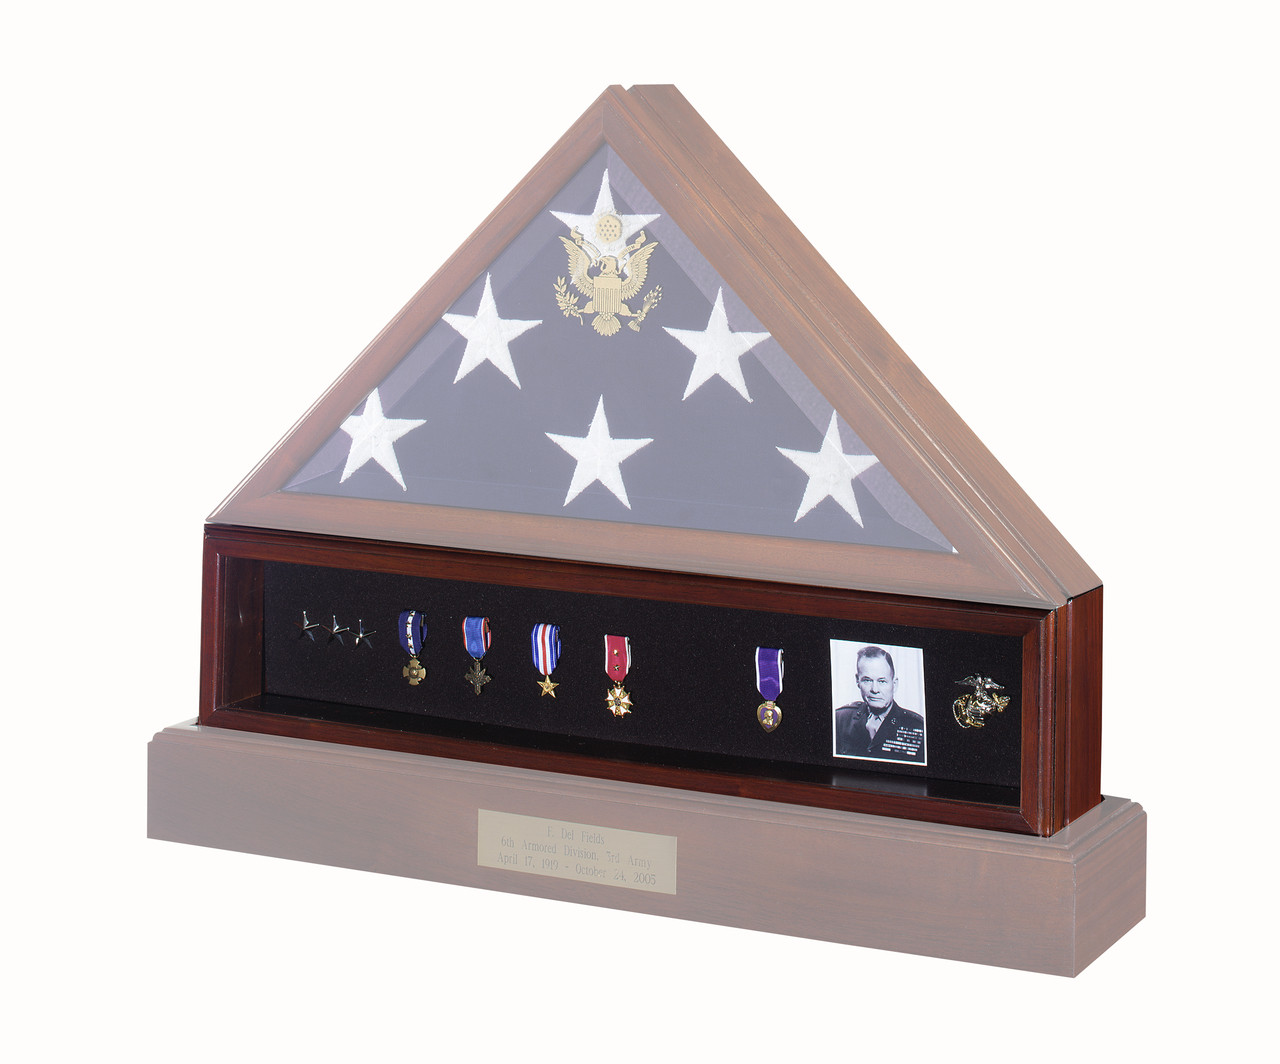 https://cdn2.bigcommerce.com/server3100/a04ed/products/1668/images/3412/Display_Case_Medals_2_with_Ghosted_Flag_Case_and_Pedestal__05402.1443445875.1280.1280.jpg?c=2